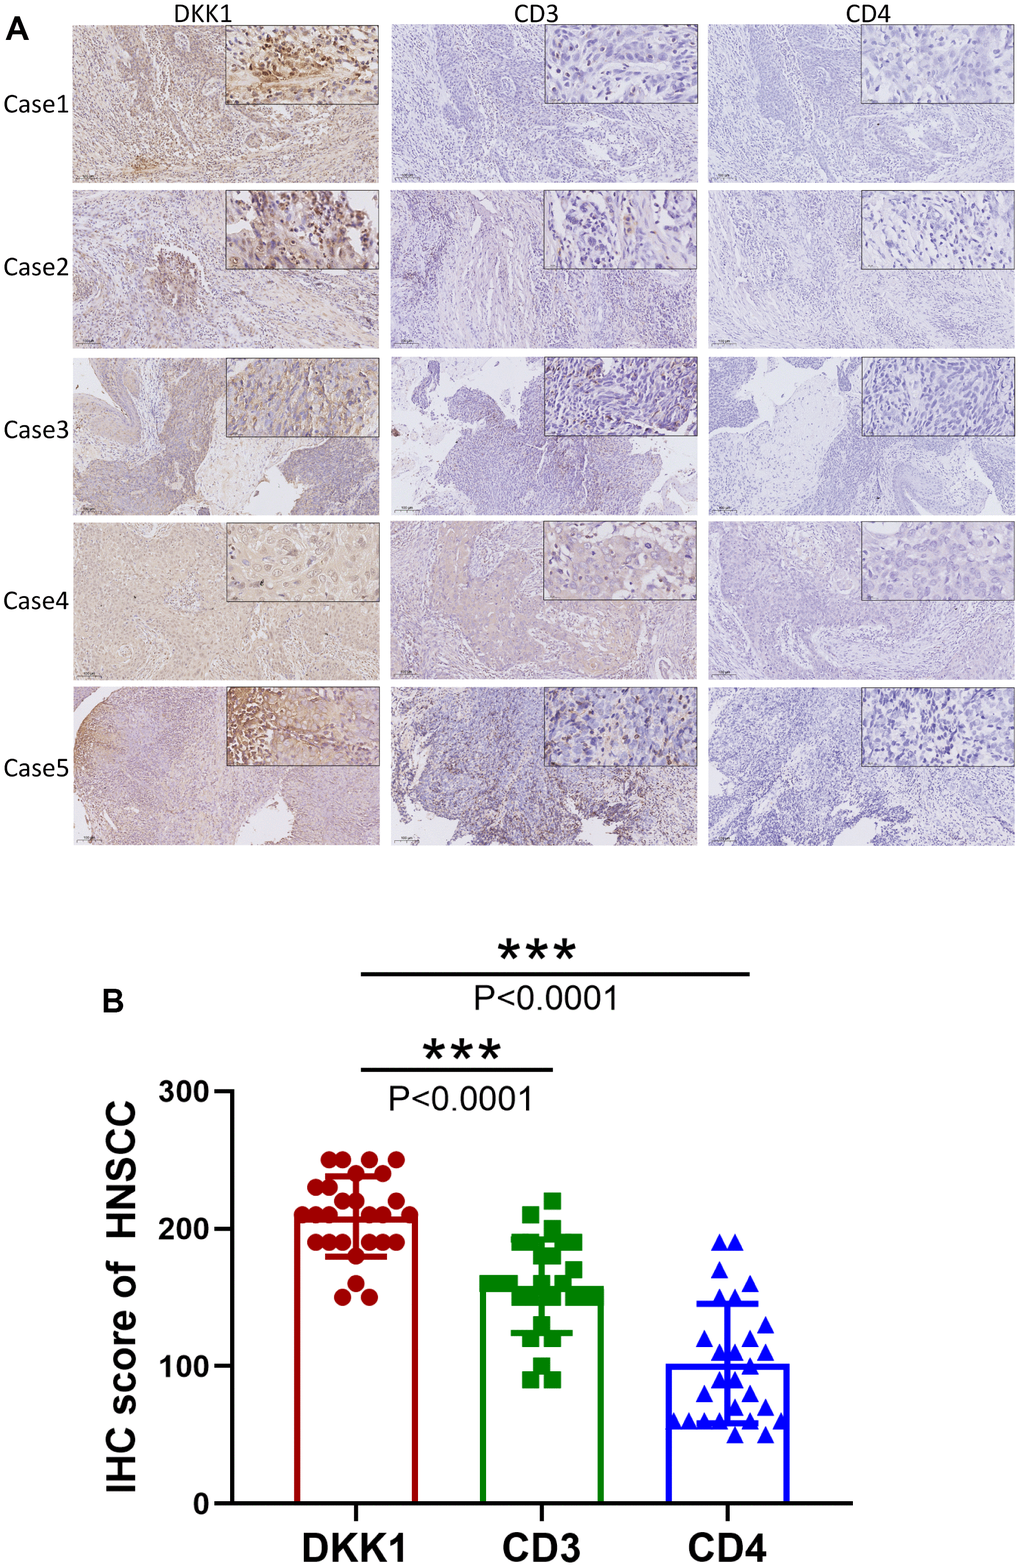 Increased DKK1 expression and decreased CD3 and CD4 expression in HNSCC. (A) IHC of DKK1, CD3, and CD4 expression in representative HNSCC samples. (B) Scatter plots showing that the DKK1, CD3, and CD4 IHC scores differed significantly in HNSCC (***p 